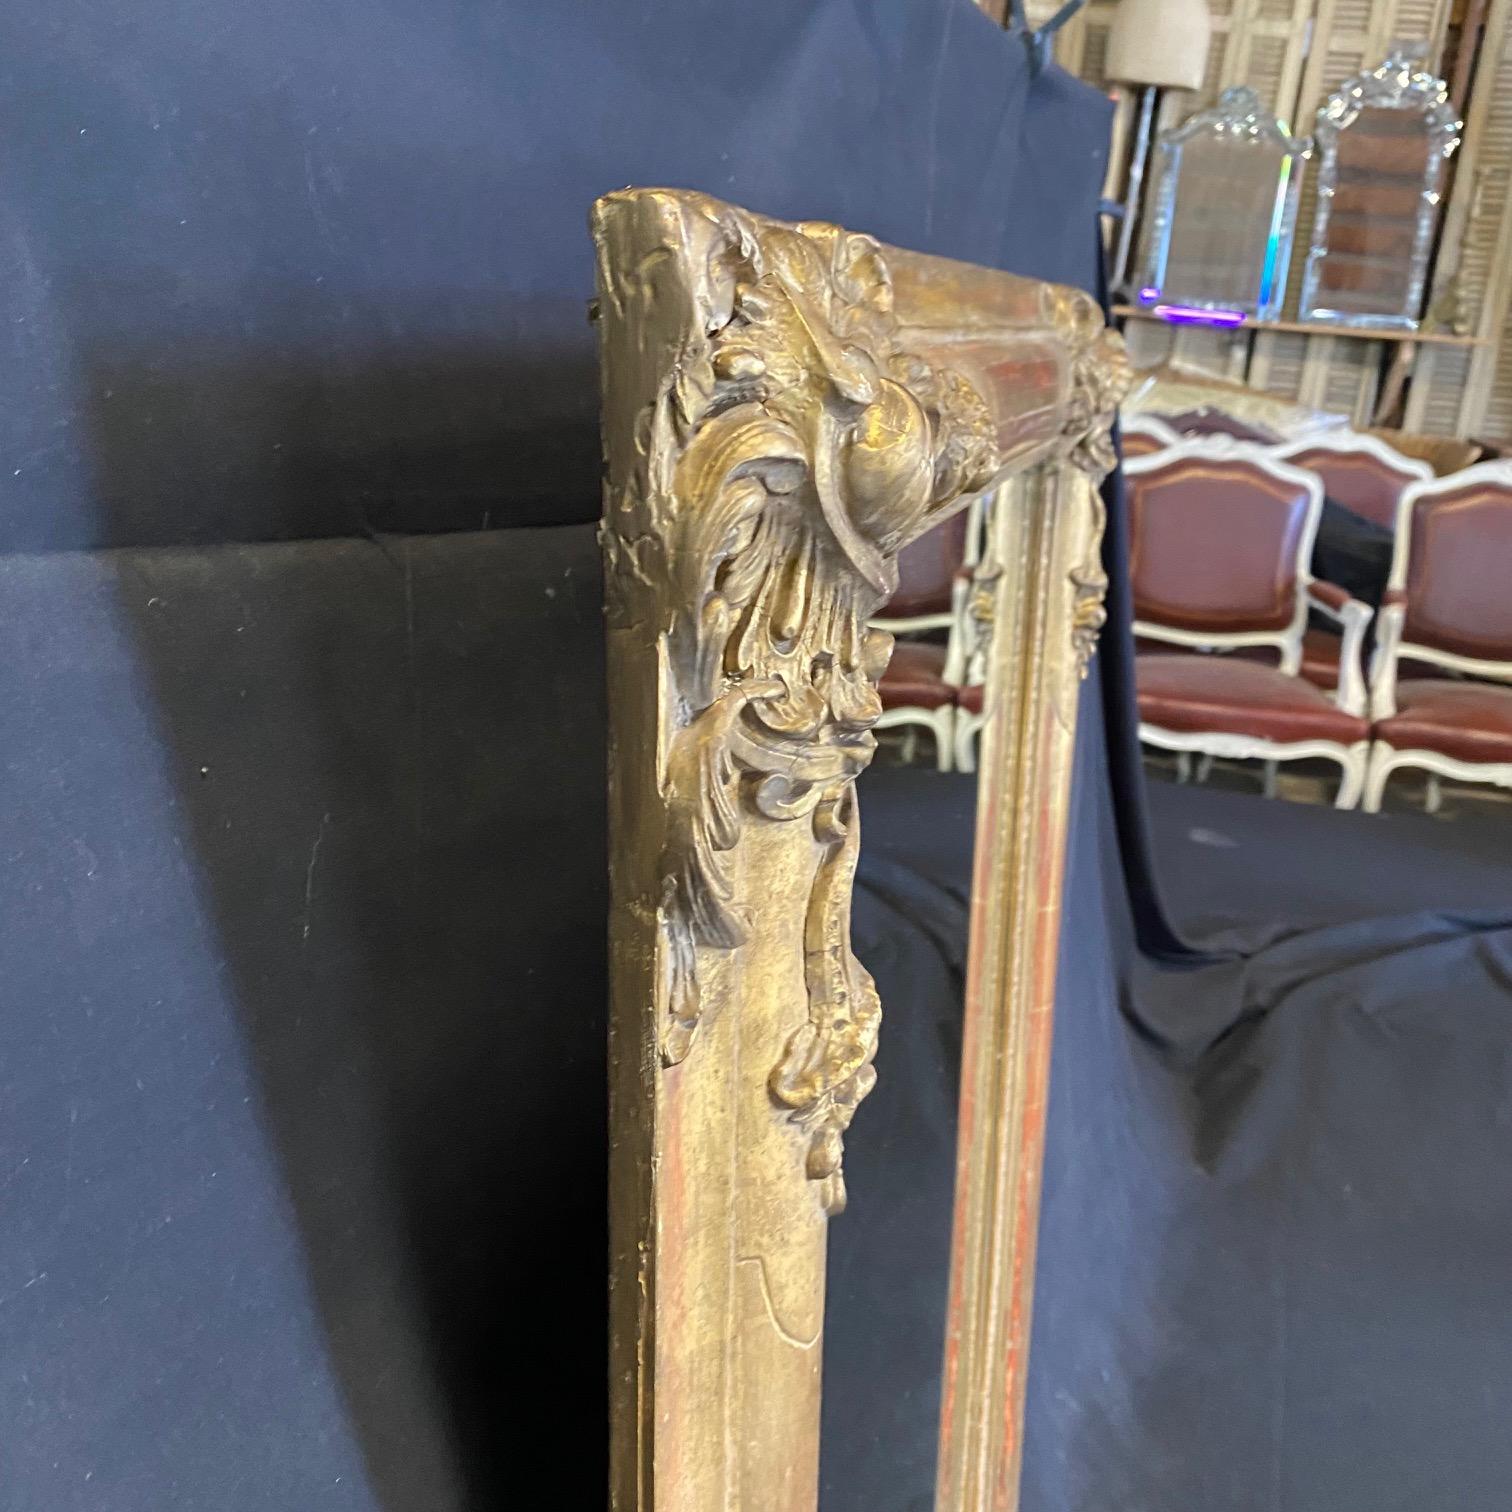 Elegant French antique gold mirror from Paris, from the atelier of Alex dre Rigalt at the Grand Place de St. Ouen, with maker's mark on the original back. There are beautiful cornucopia carvings with acanthus leaves revealing original red base under